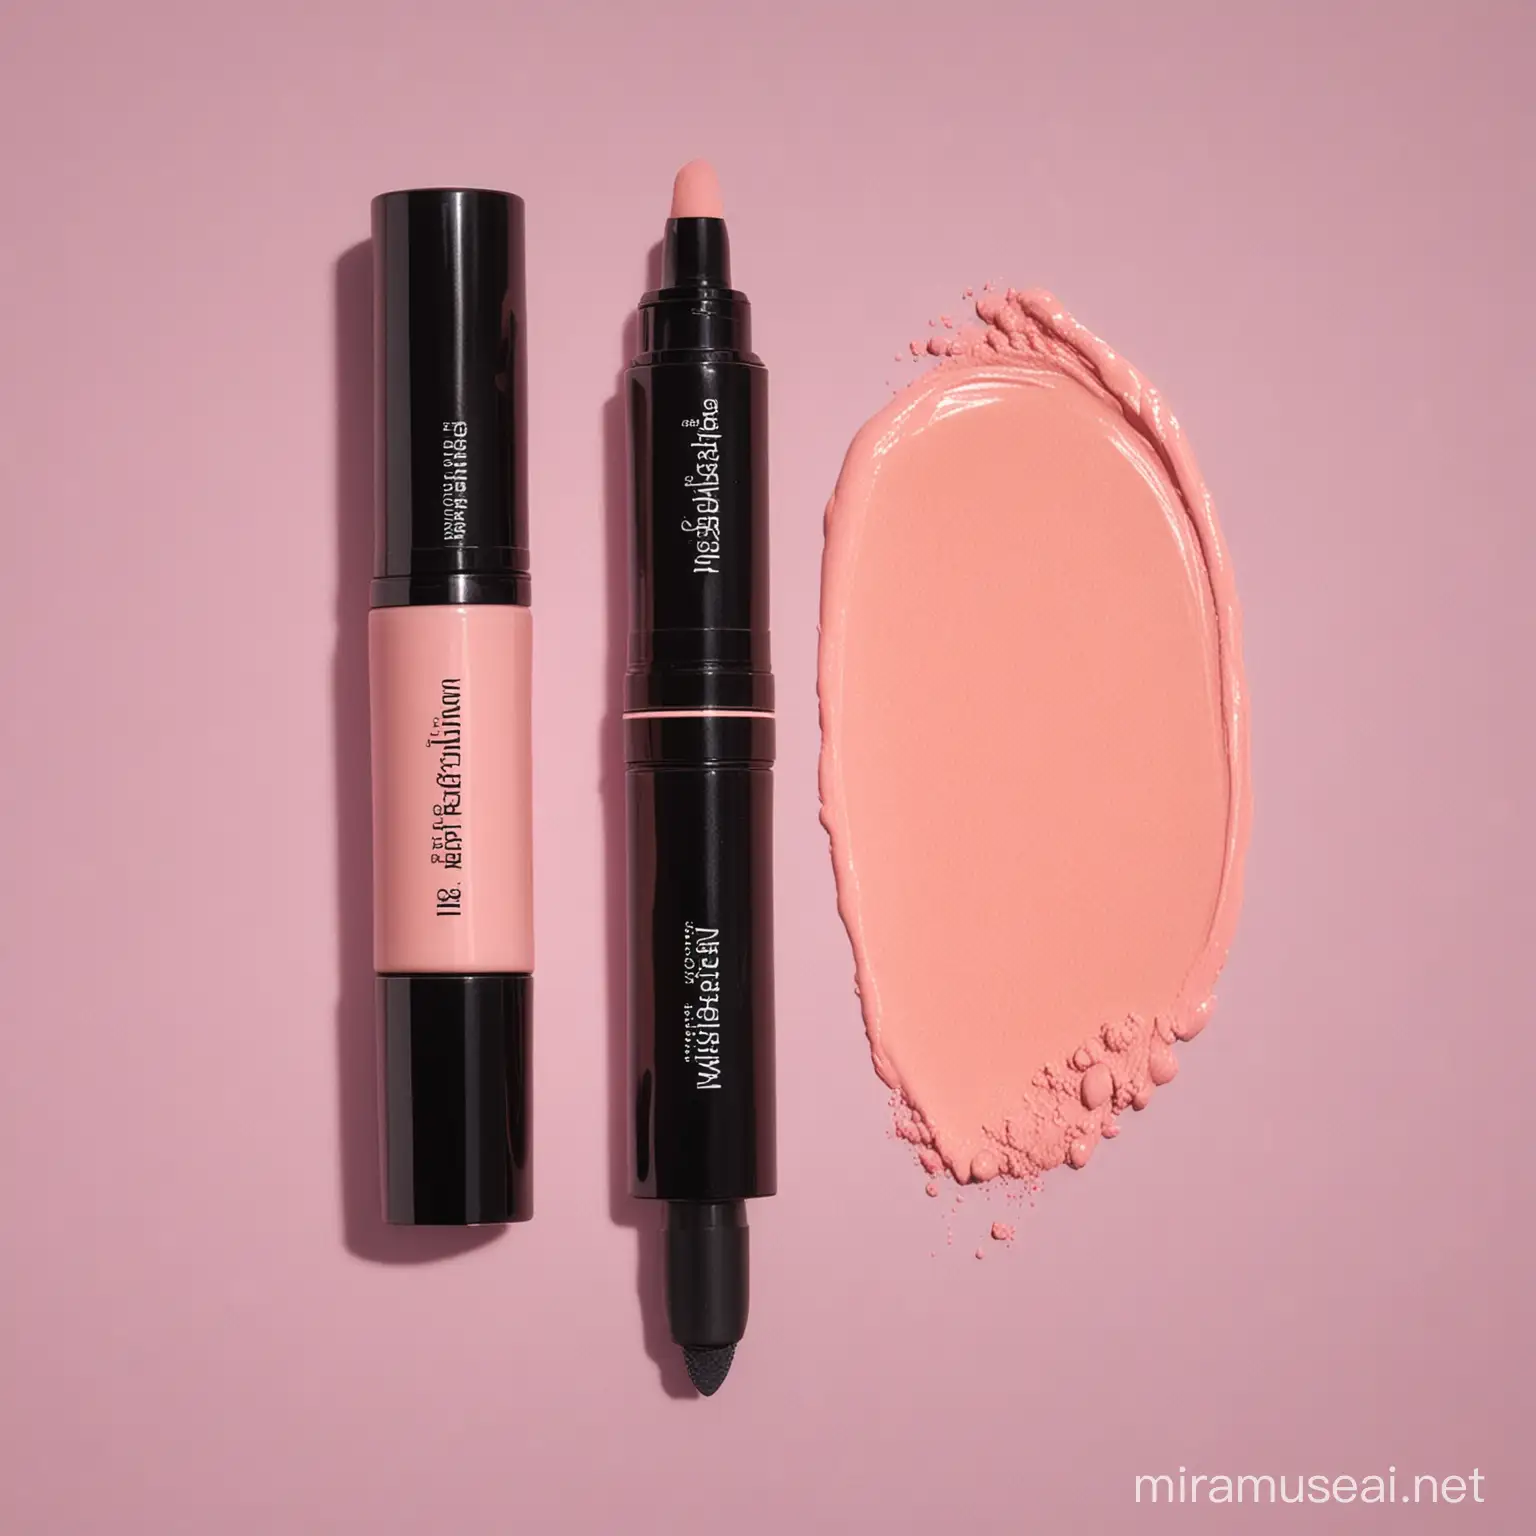 make a detailed product prototype for a makeup pen that serve as 3 in 1 product (it includes highlighter, blusher, and foundation)